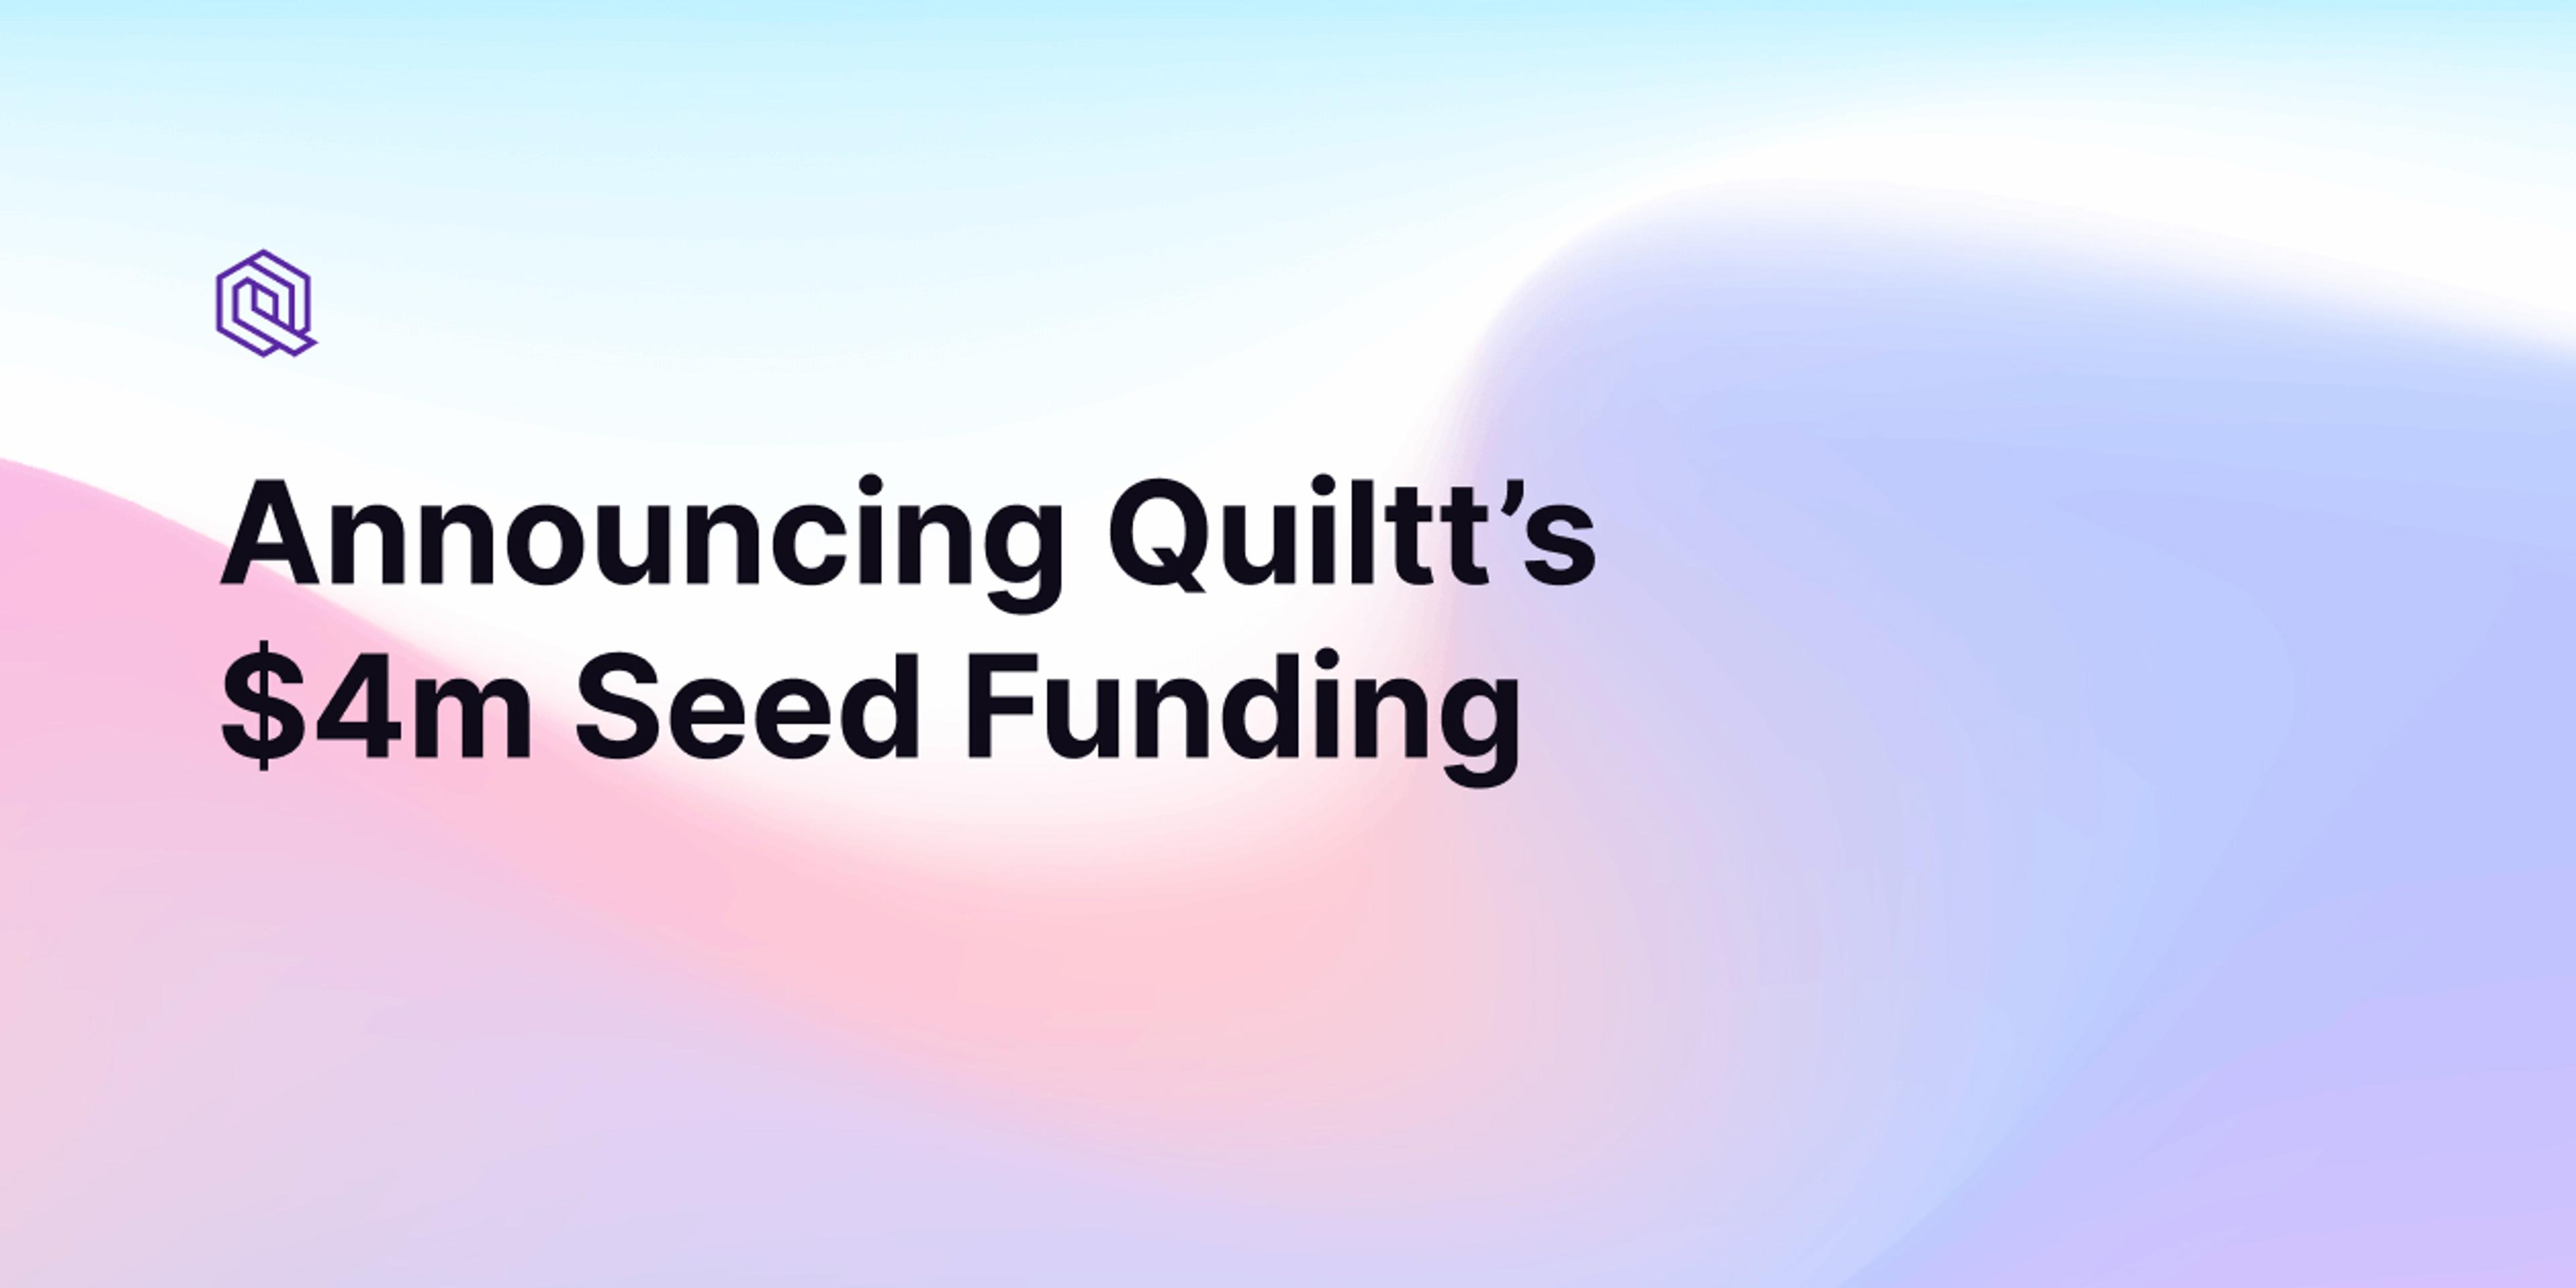 Announcing Quiltt’s $4m Seed Funding